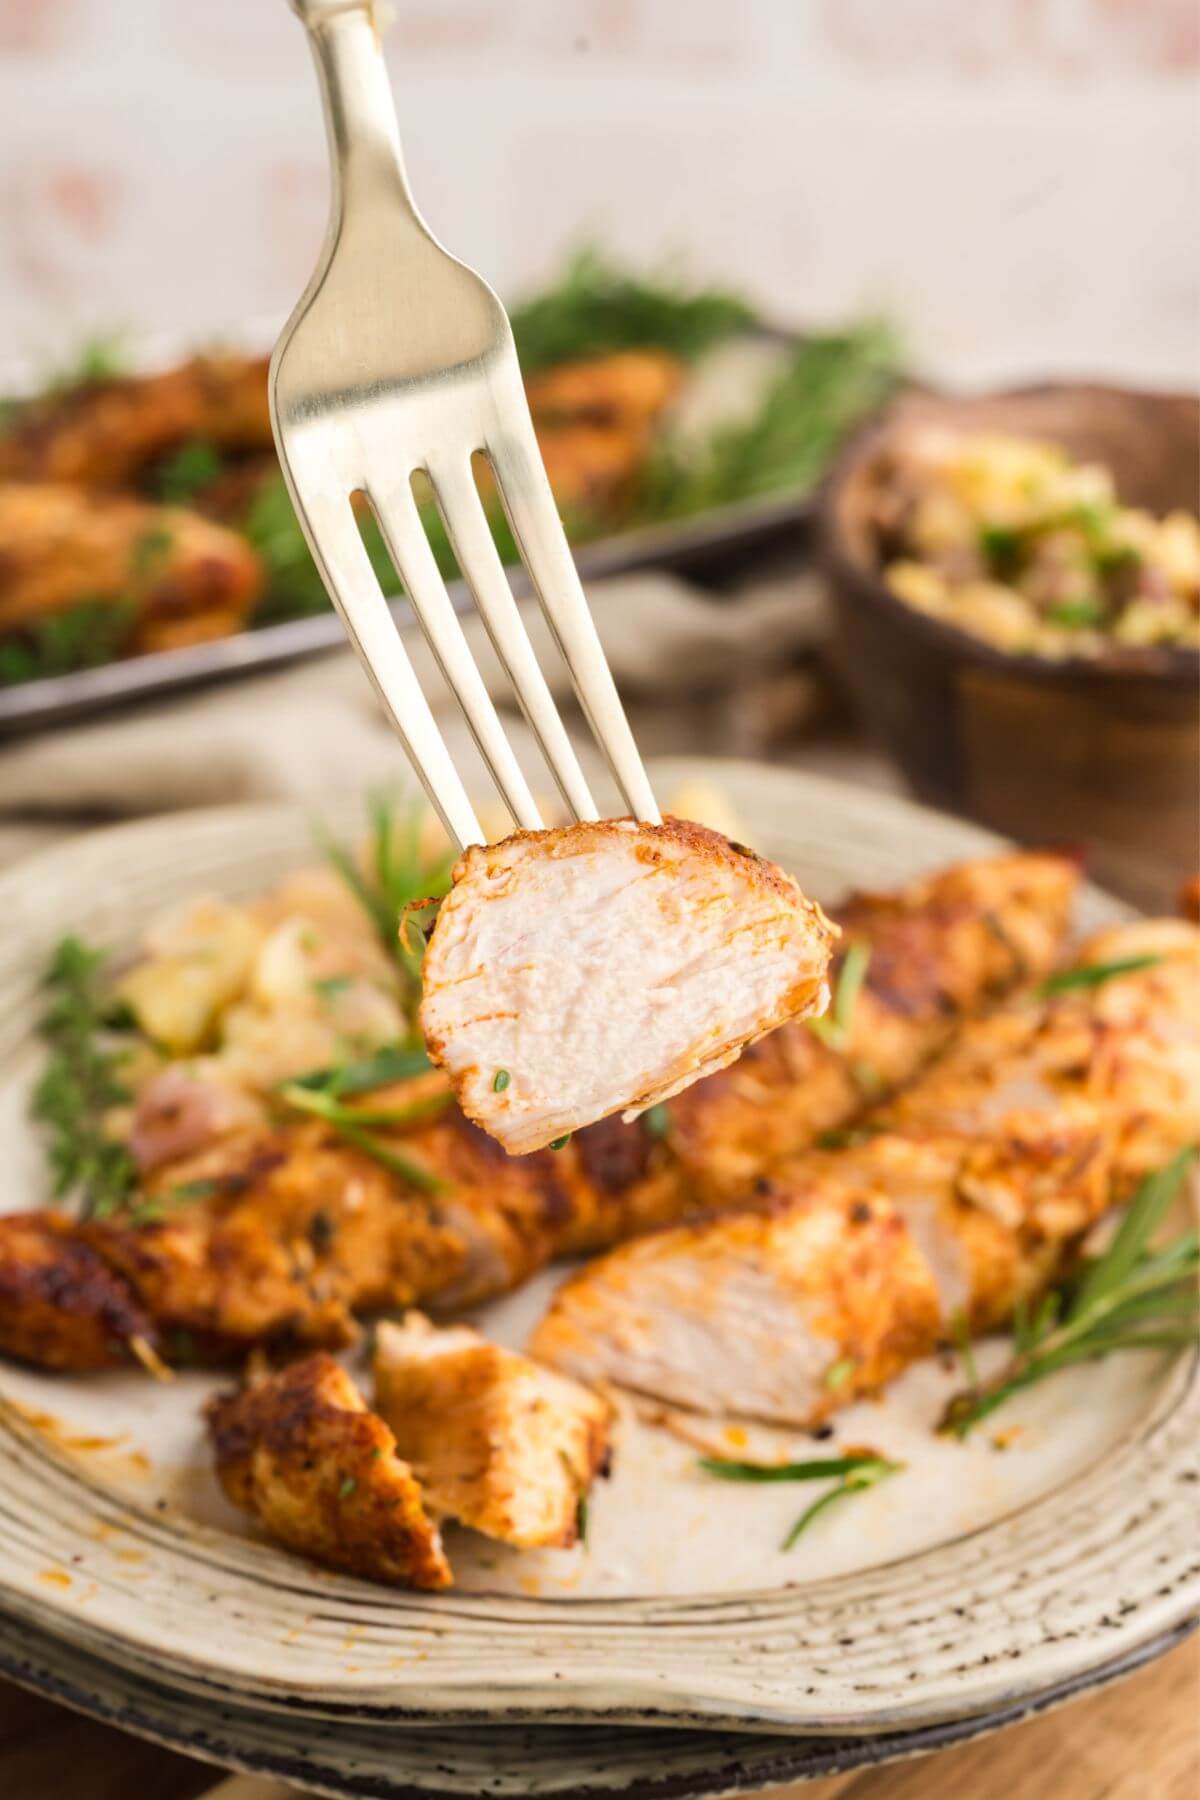 Turkey tenderloins on plate while someone raises a piece up with a fork.